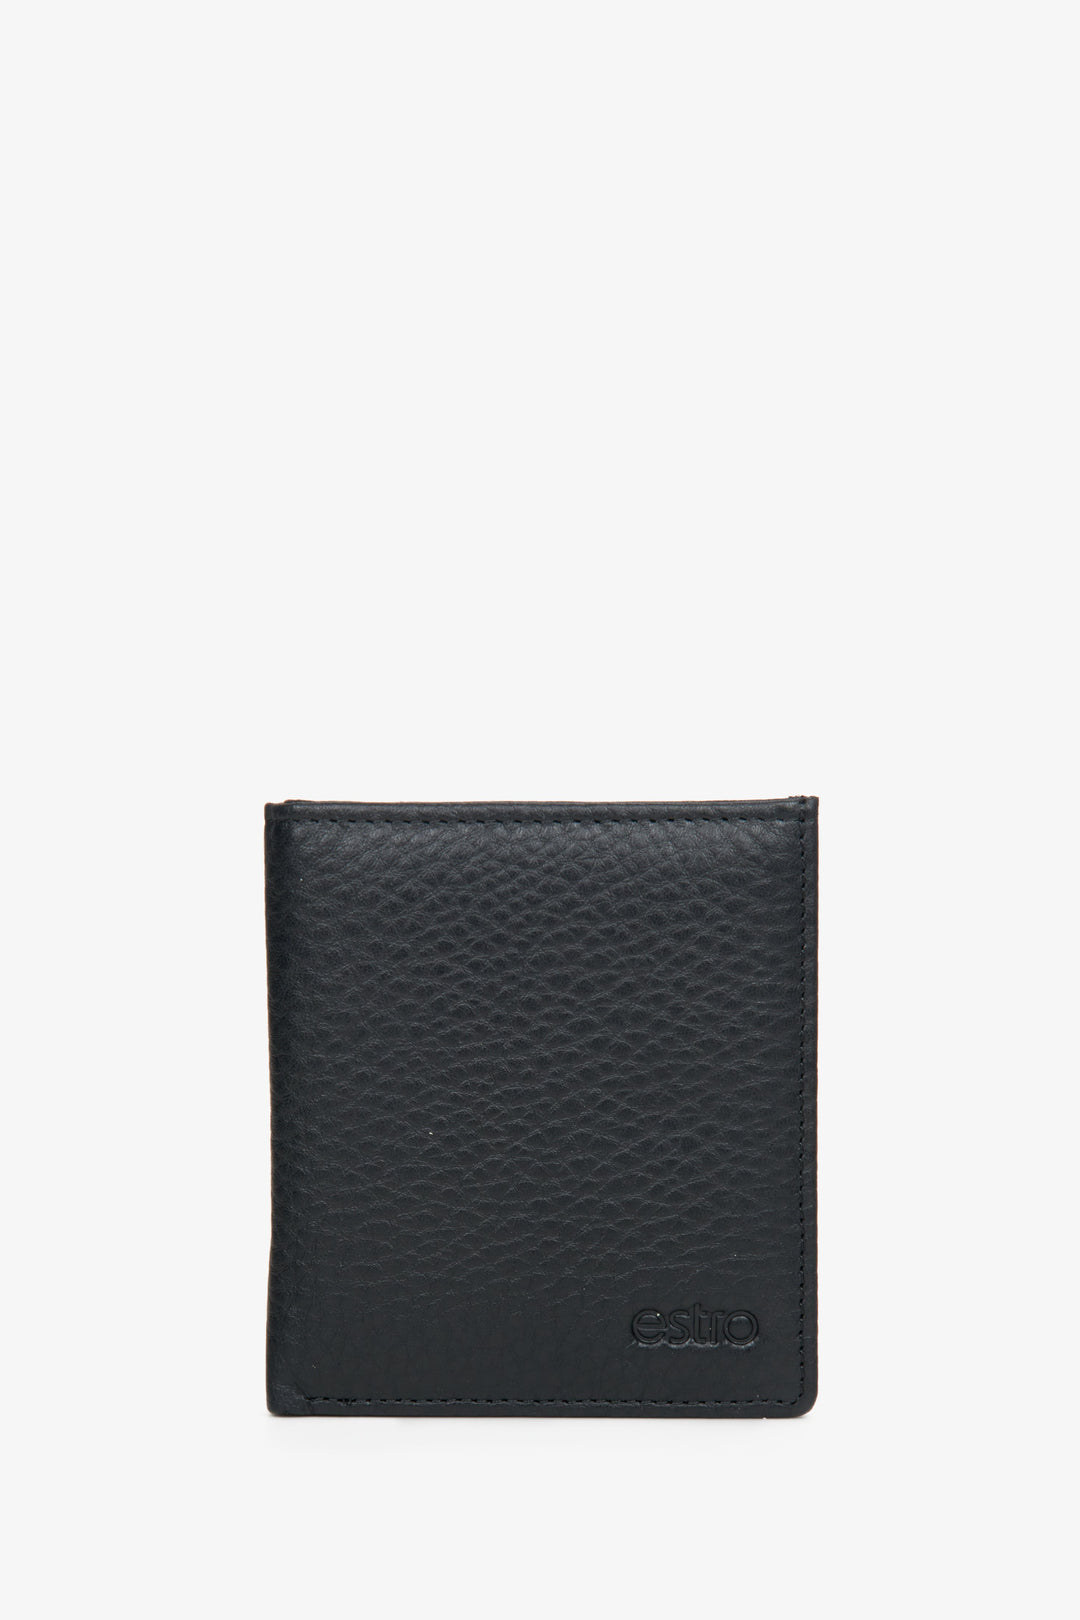 Men's black compact wallet made of genuine leather by Estro.